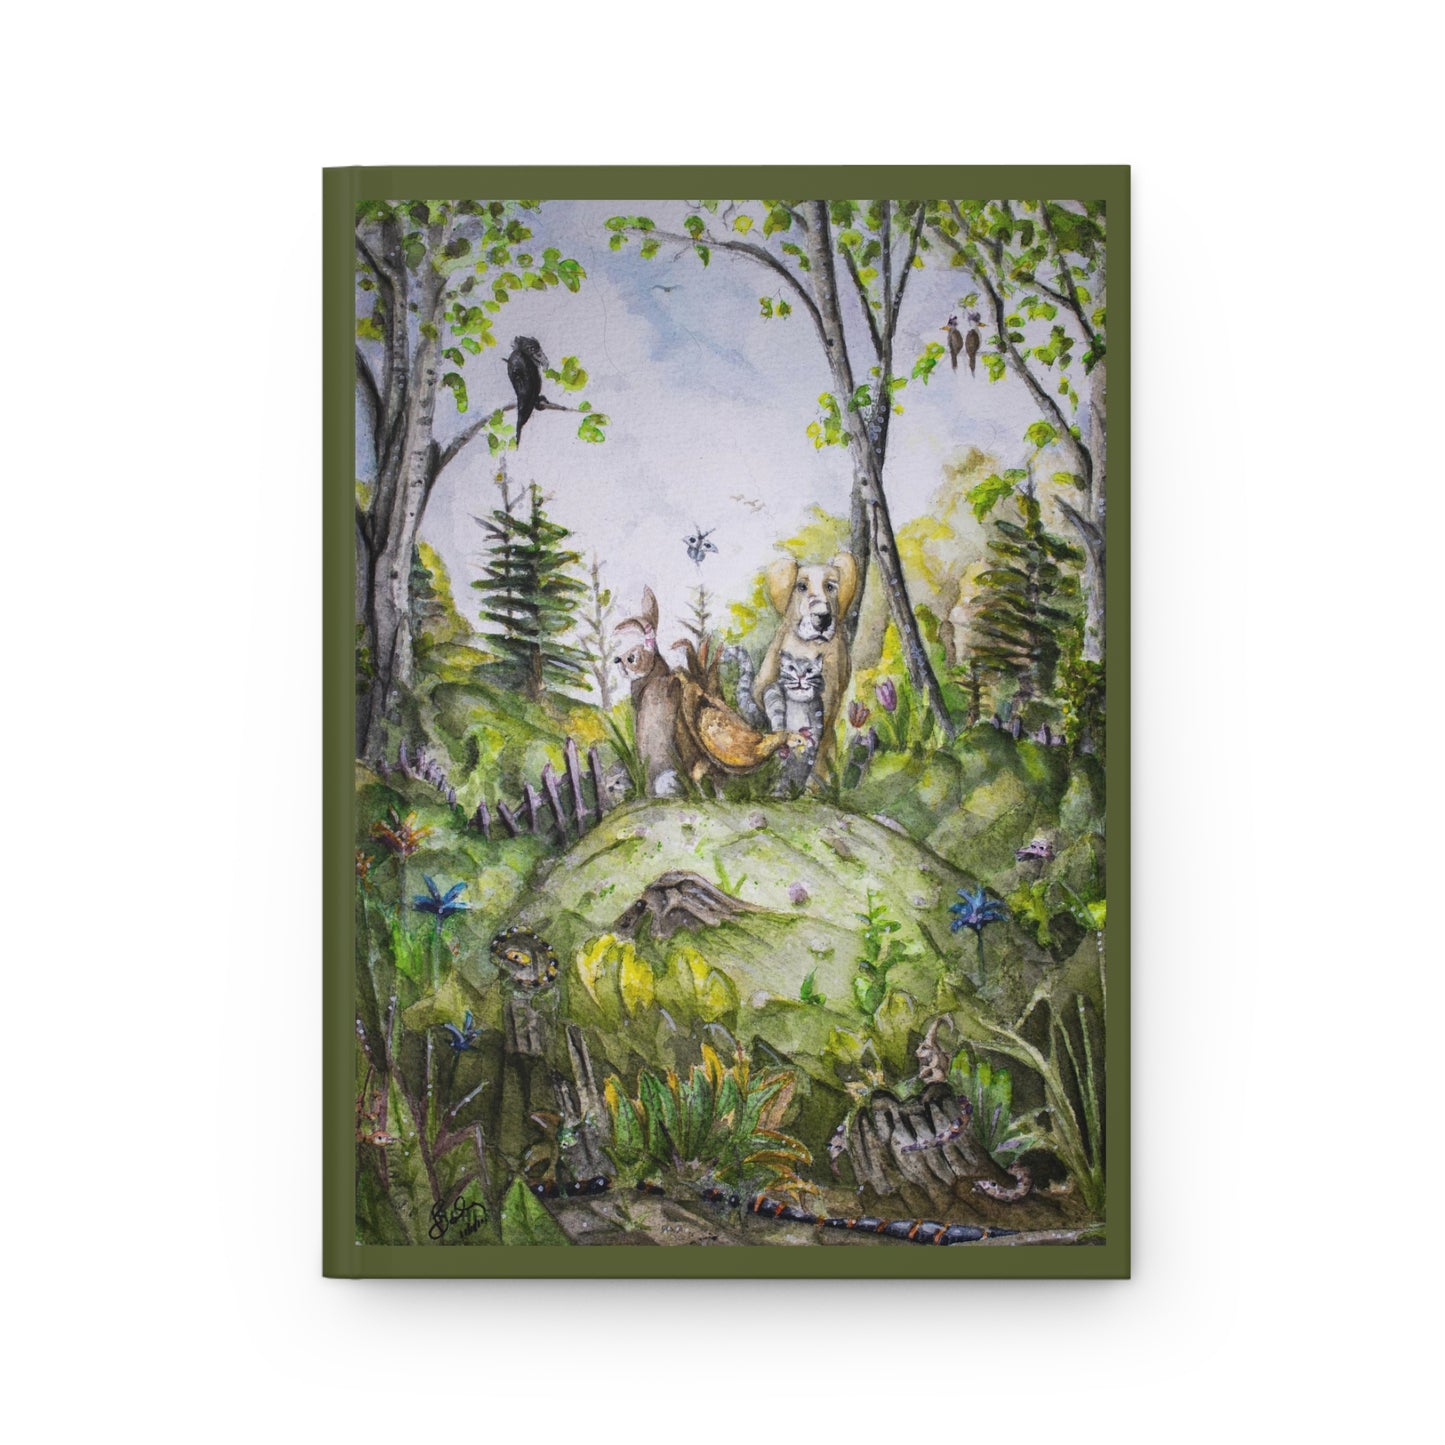 Unexpected Bonds: 'Forest Mound Fellowship' Hardcover Journal - Mindful Reflections, 150 Lined Pages, Durable & Inspirational Notebook